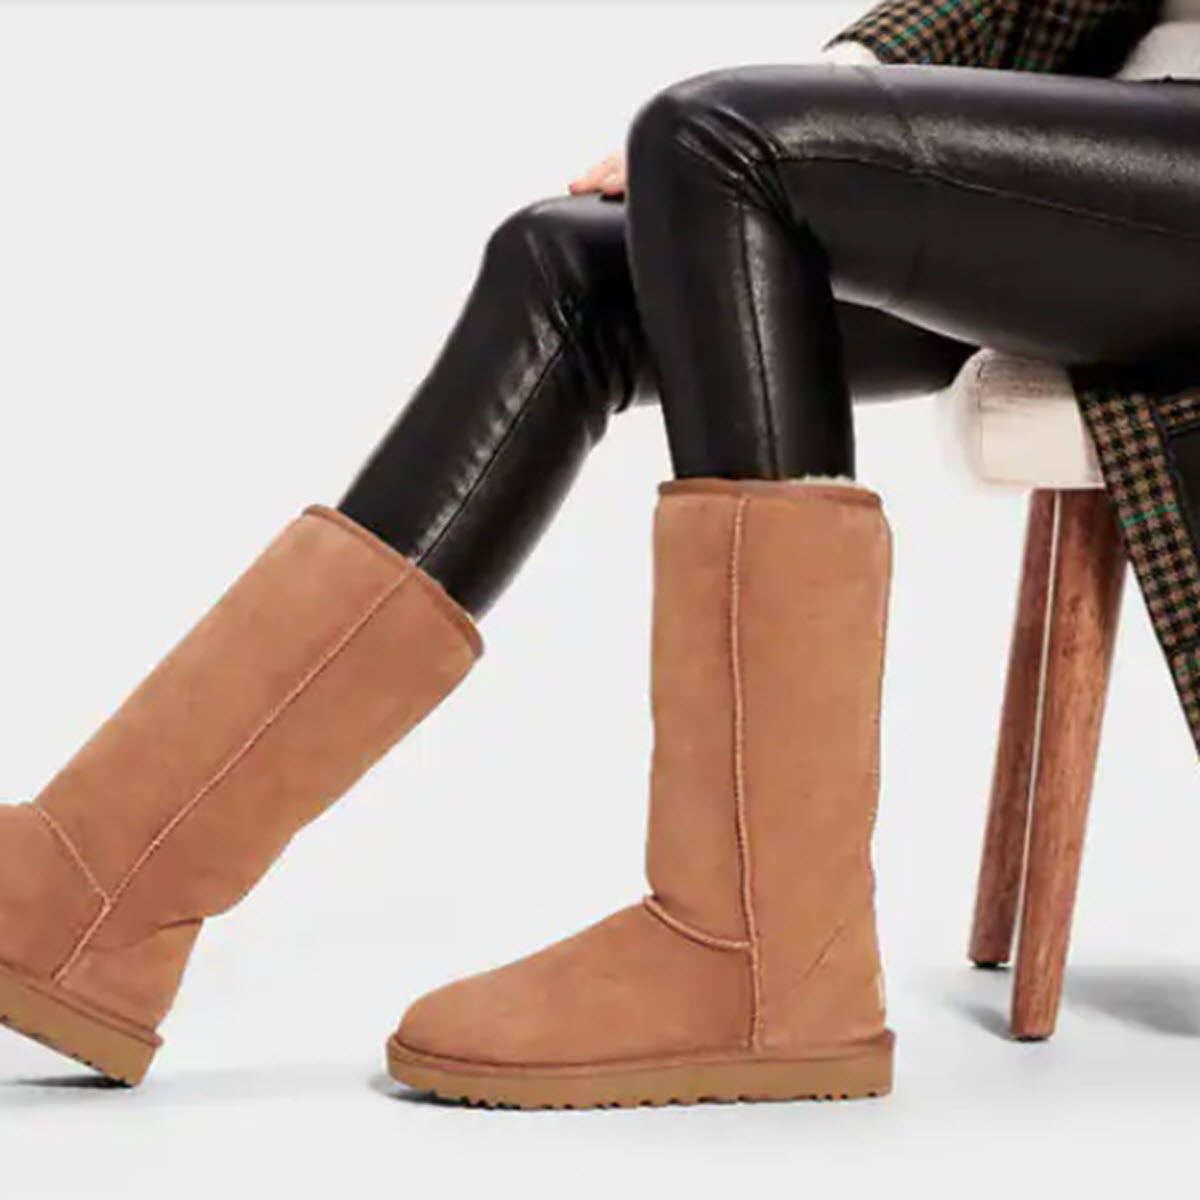 The Ugg Classic Tall Boot in Chestnut – Shoes 'N' More